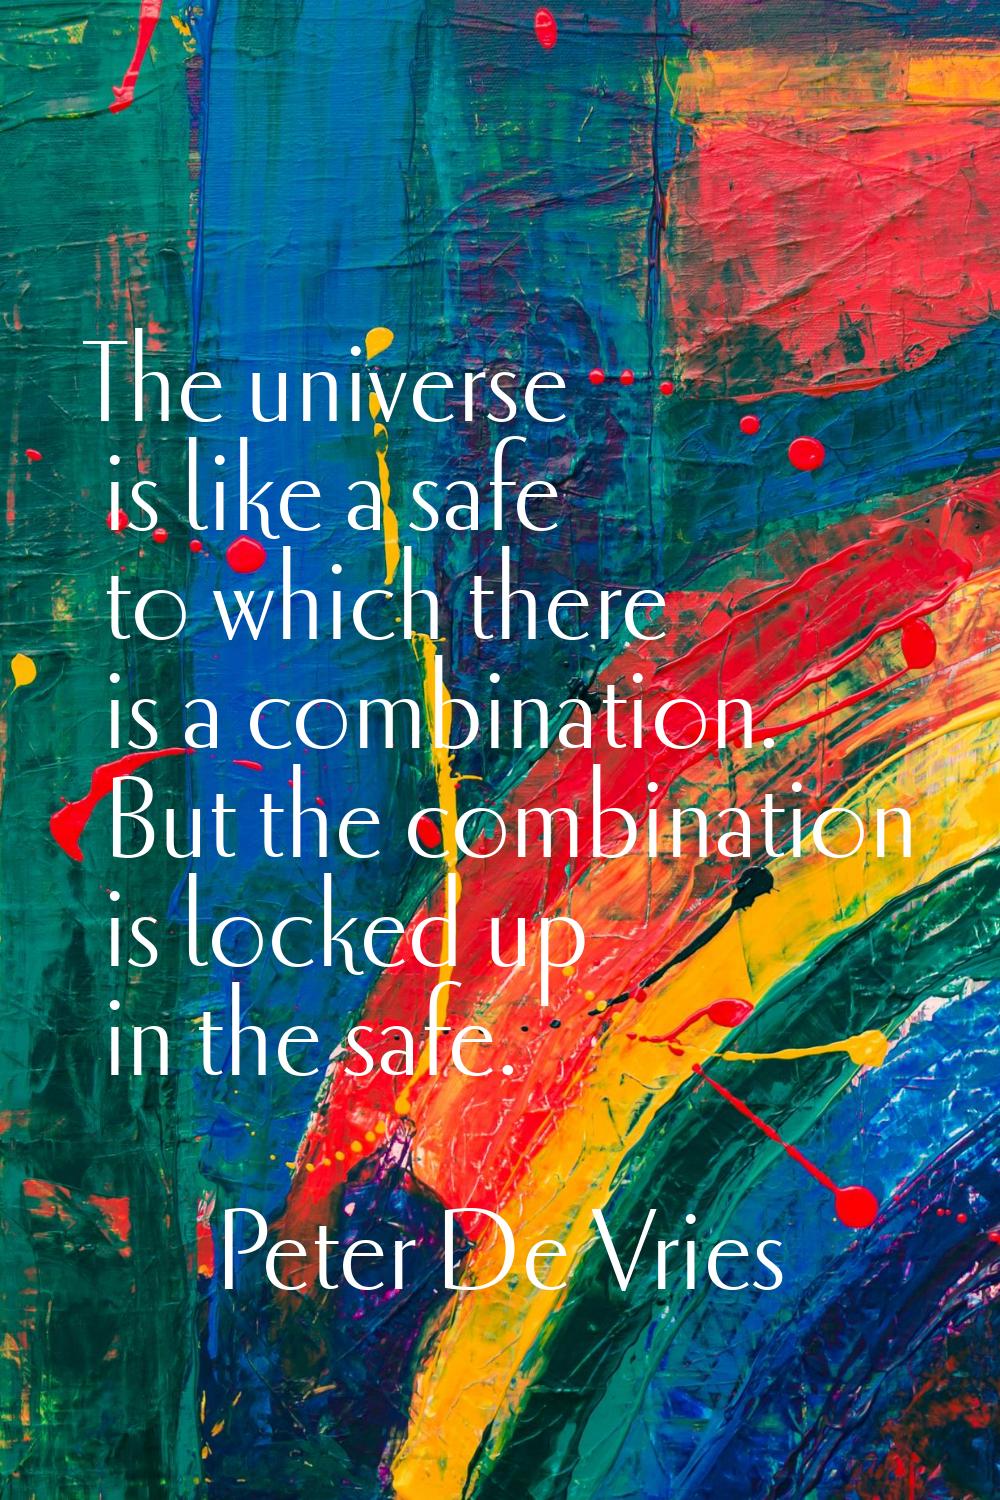 The universe is like a safe to which there is a combination. But the combination is locked up in th